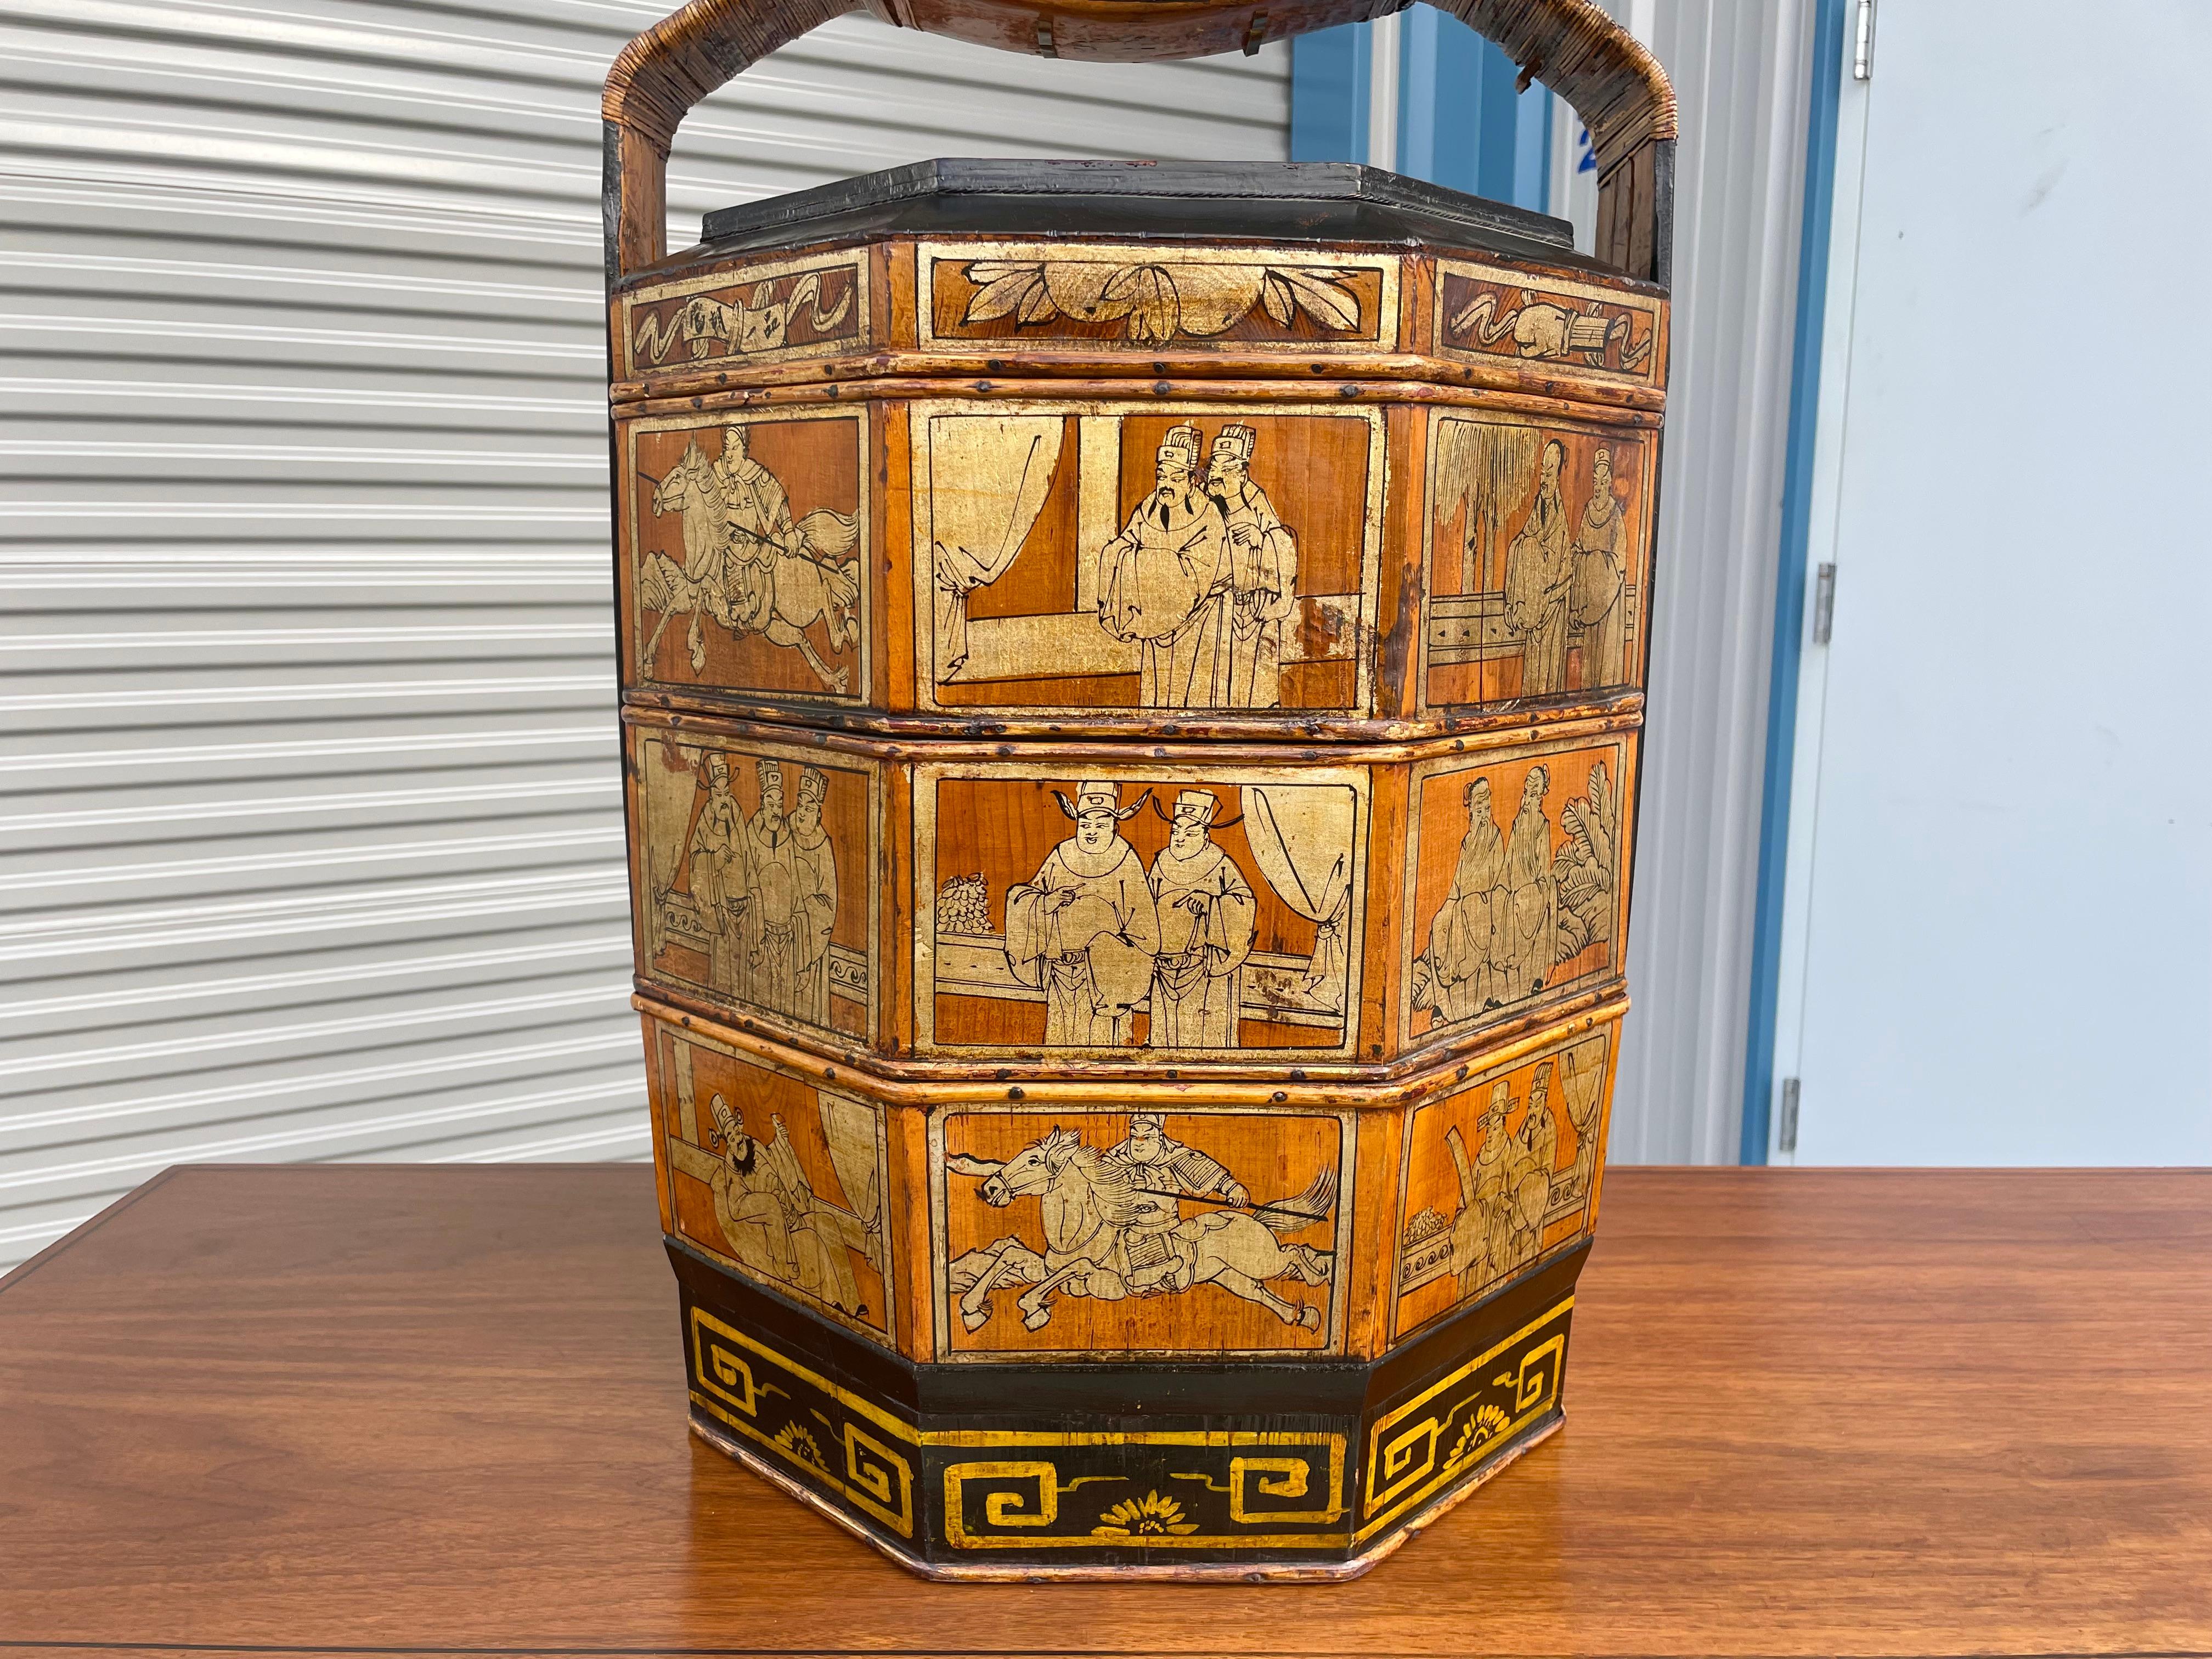 Vintage Chinese wedding basket designed and manufactured in Asia circa 1900s. This beautiful Chinese wedding basket features a painted decor that tells us a story. The basket also comes with three stackable trays. A perfect addition to your home or